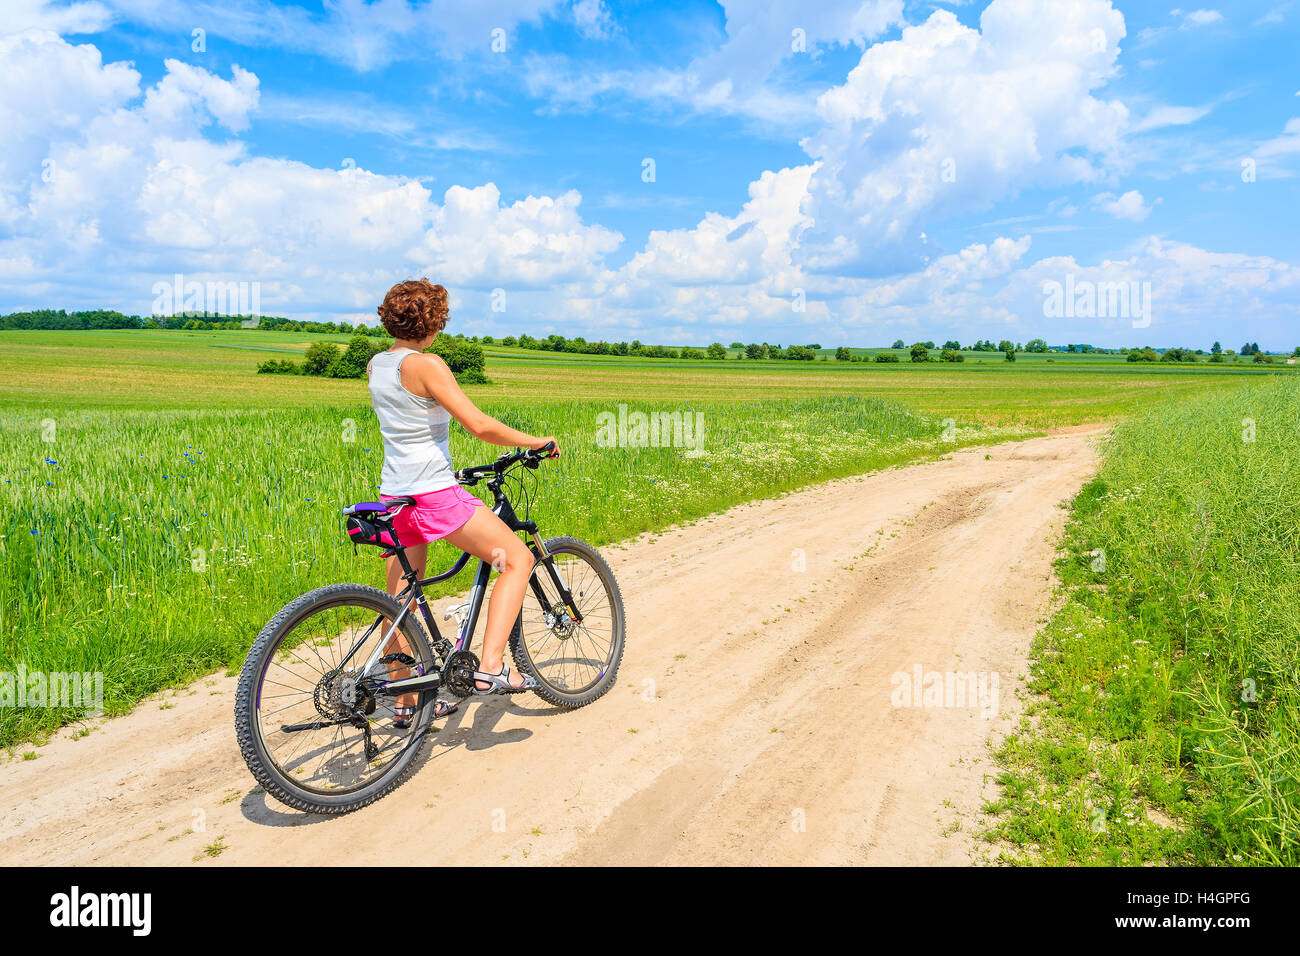 Young attractive woman riding a bike on rural road in green summer landscape, Poland Stock Photo